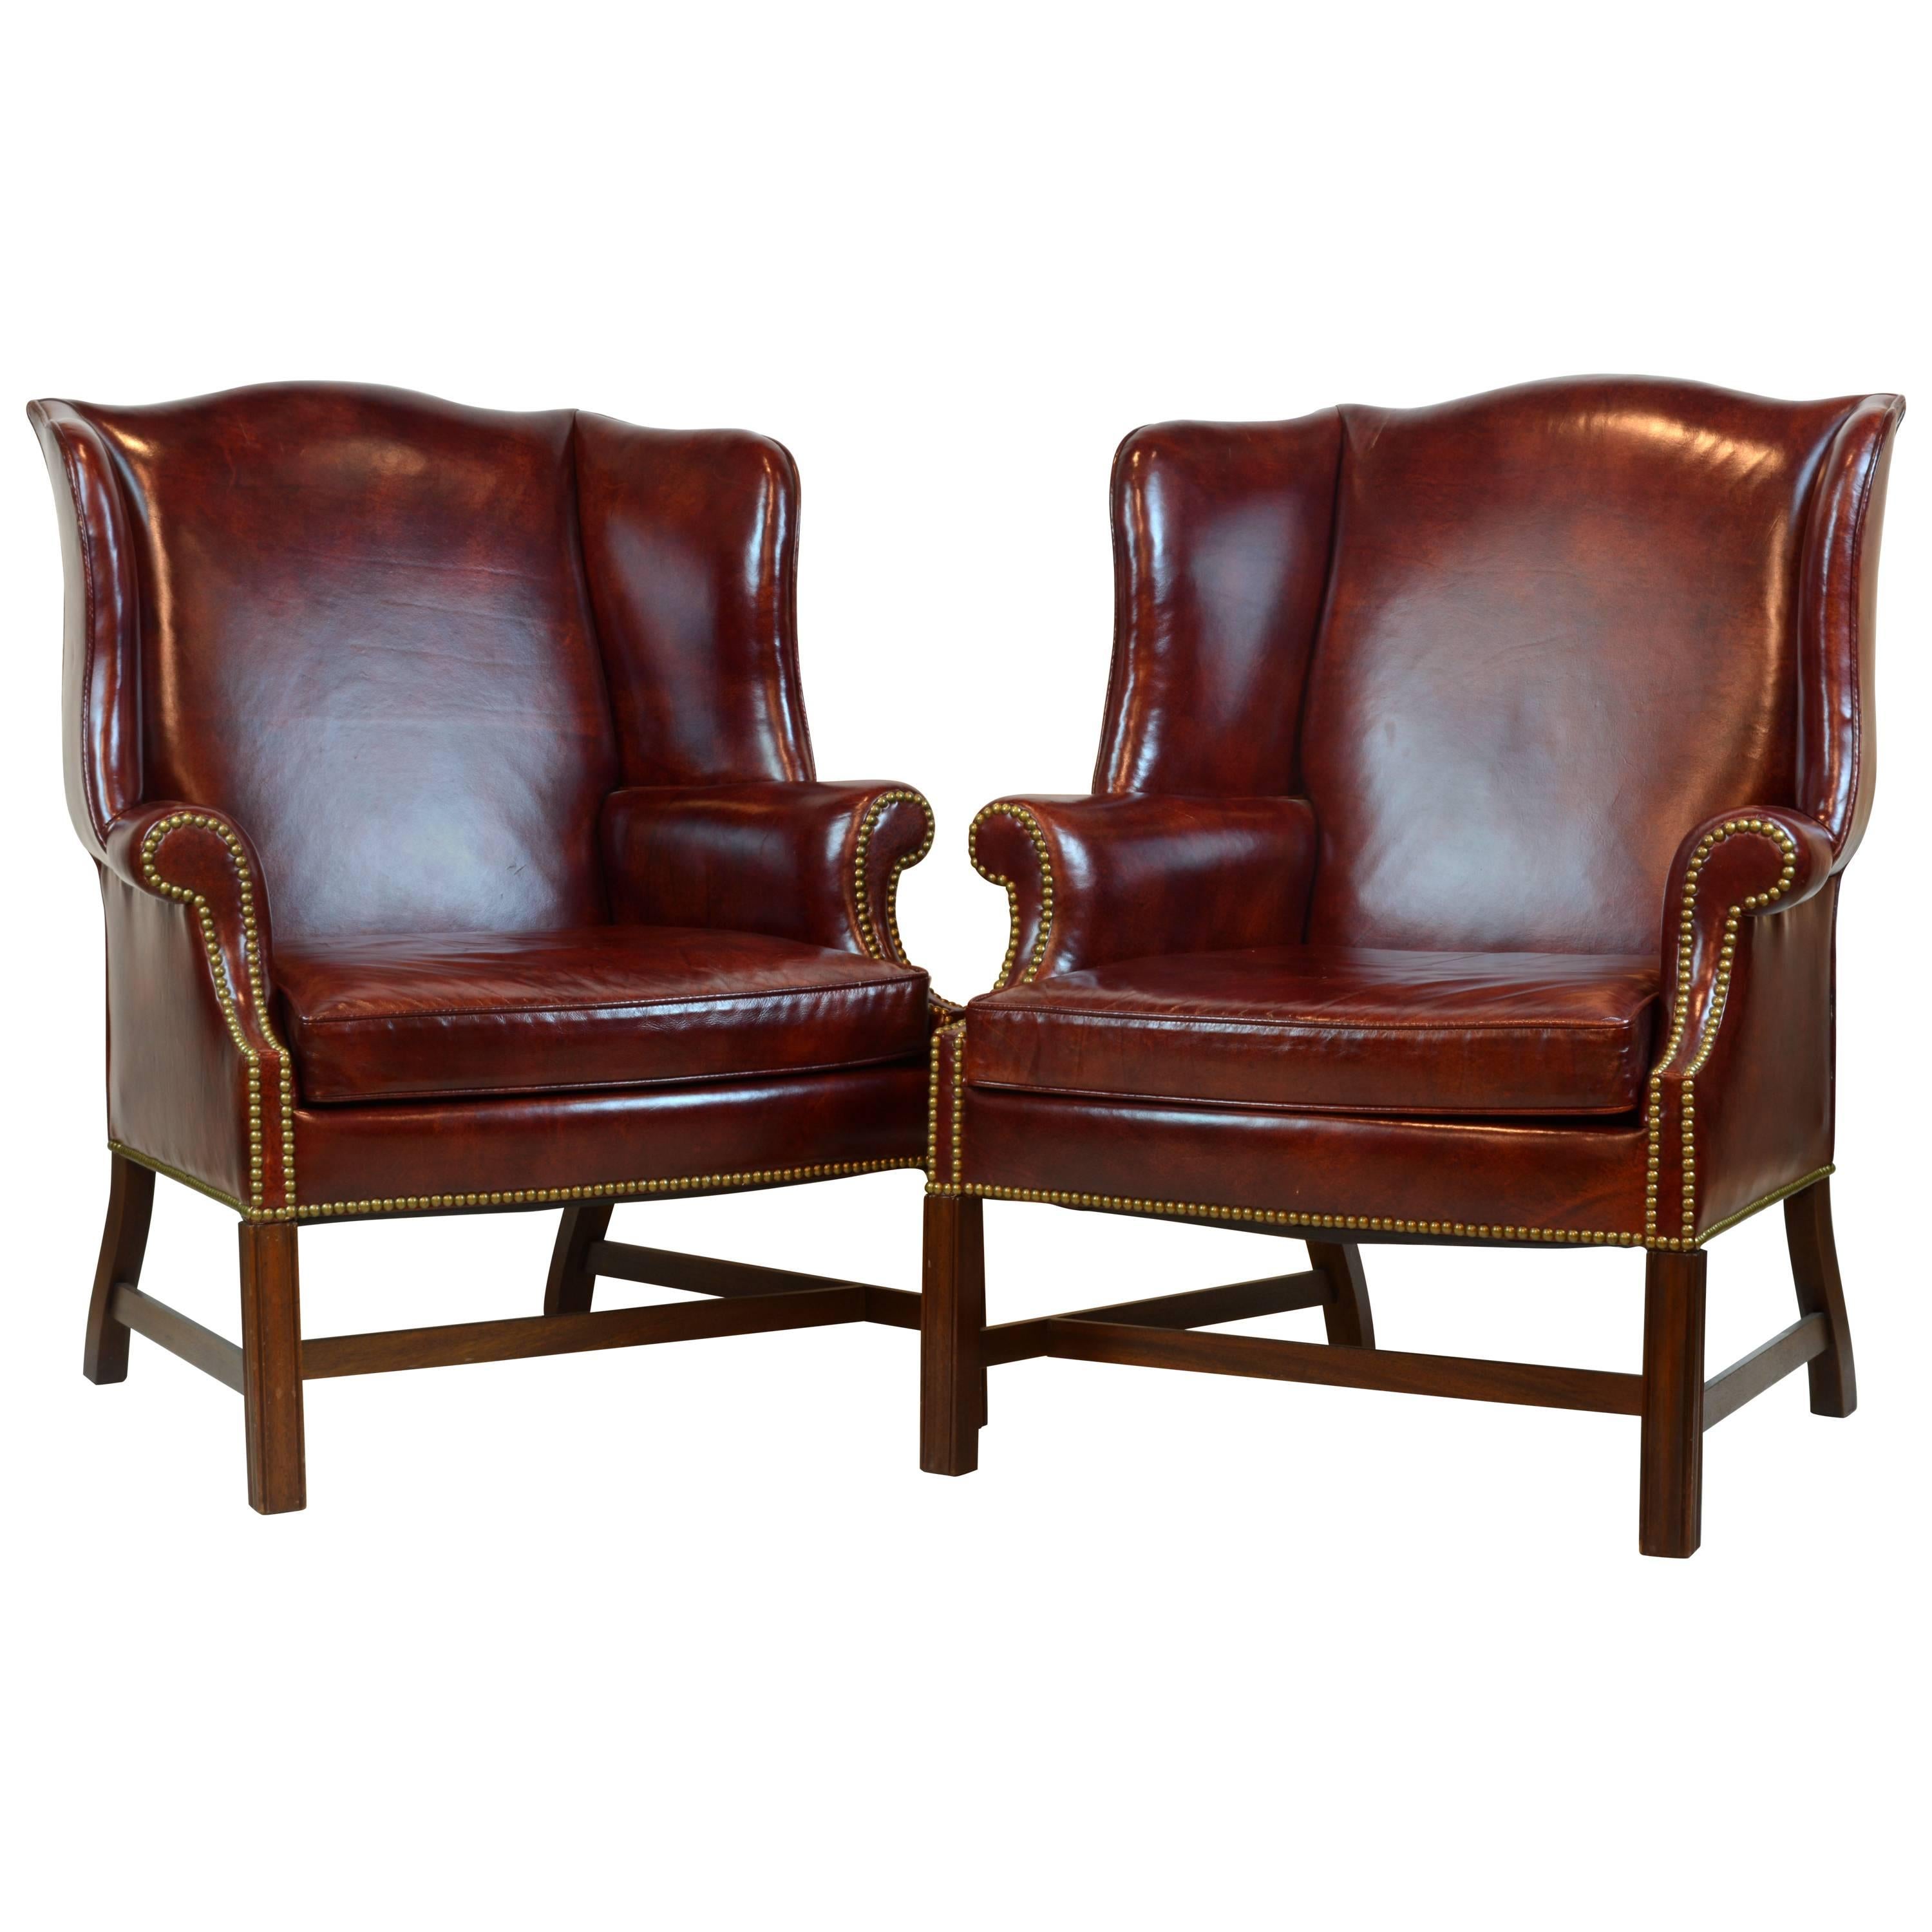 Pair of Comfortable Vintage George III Style Leather Covered Wingback Chairs